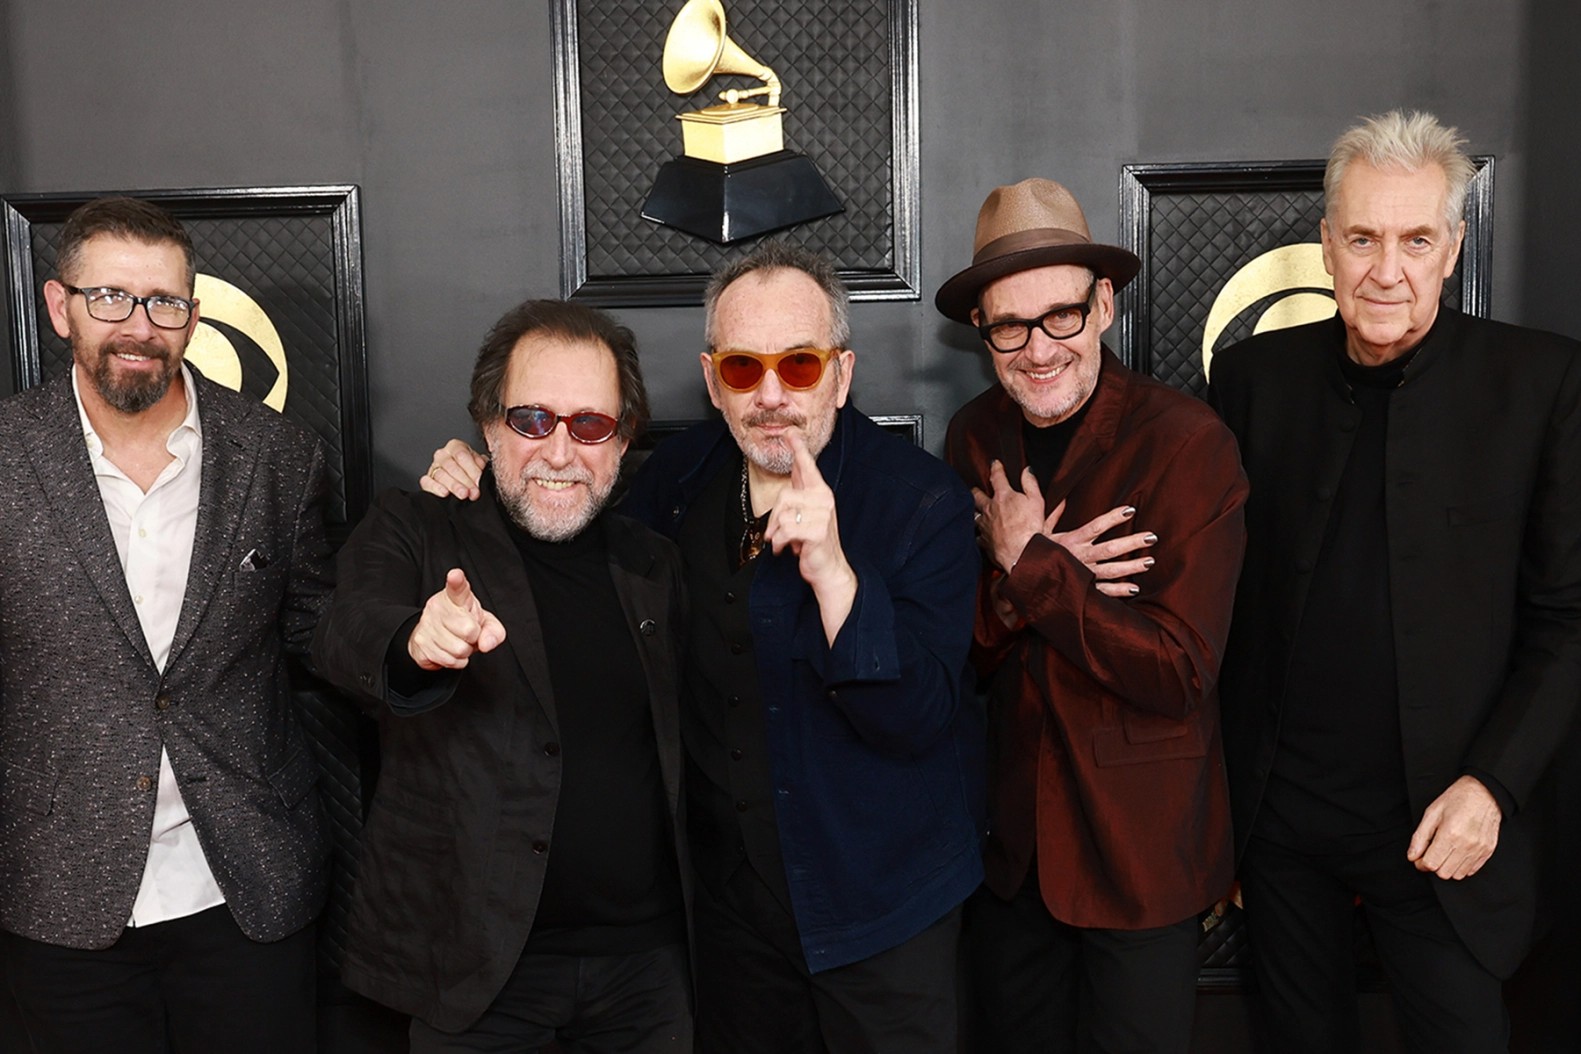 Elvis Costello & The Imposters Set for “We’re All Going On A Summer